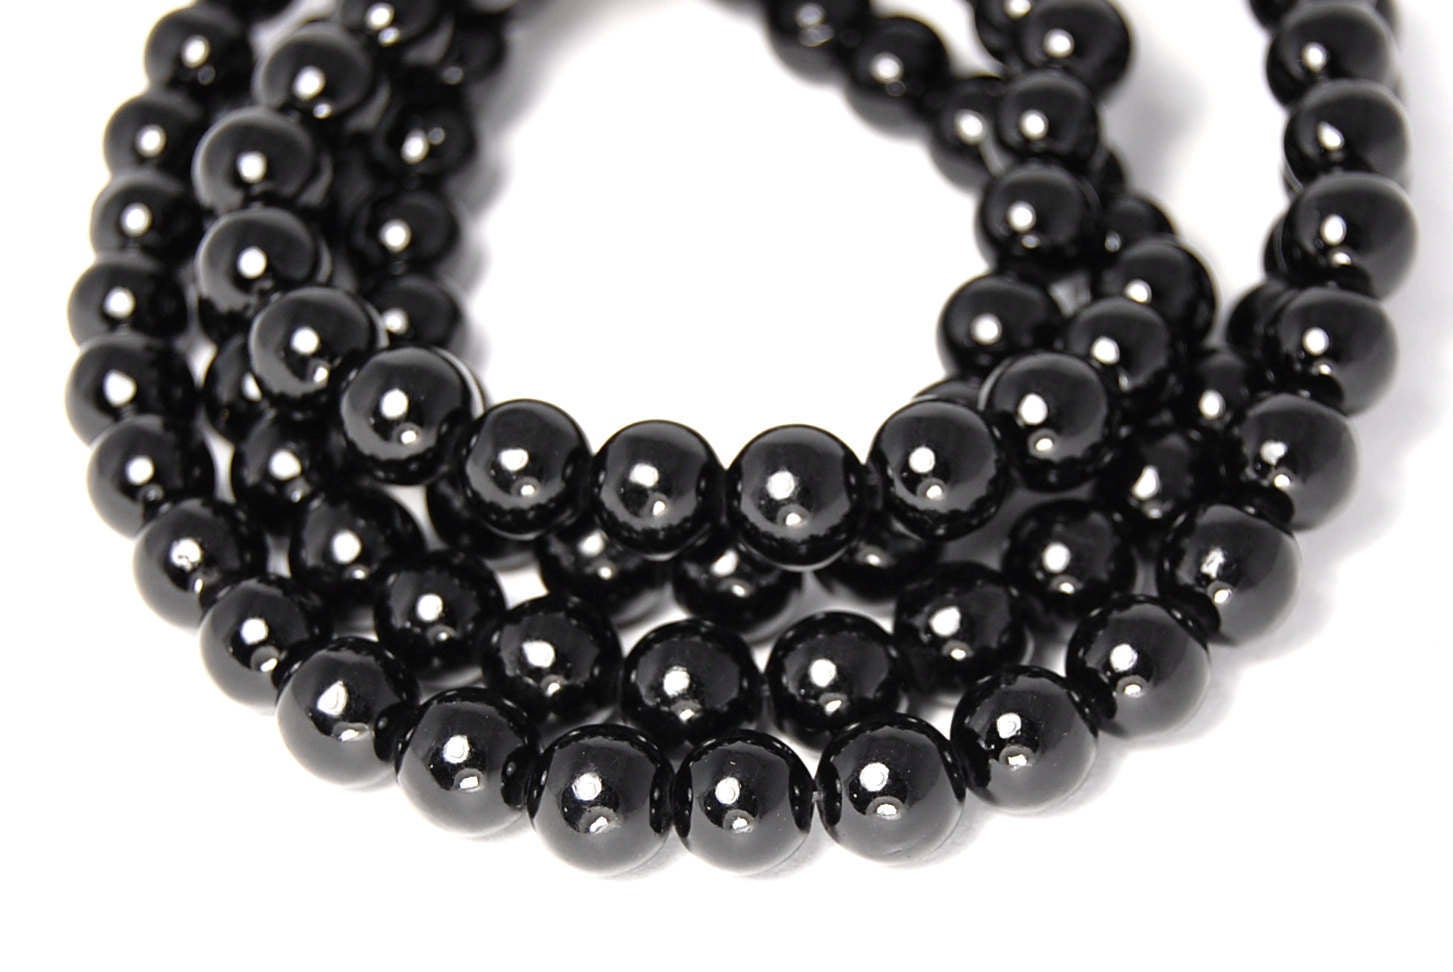 8mm Opaque Black Jade Beads Opaque Smooth - 15.5 inch strand